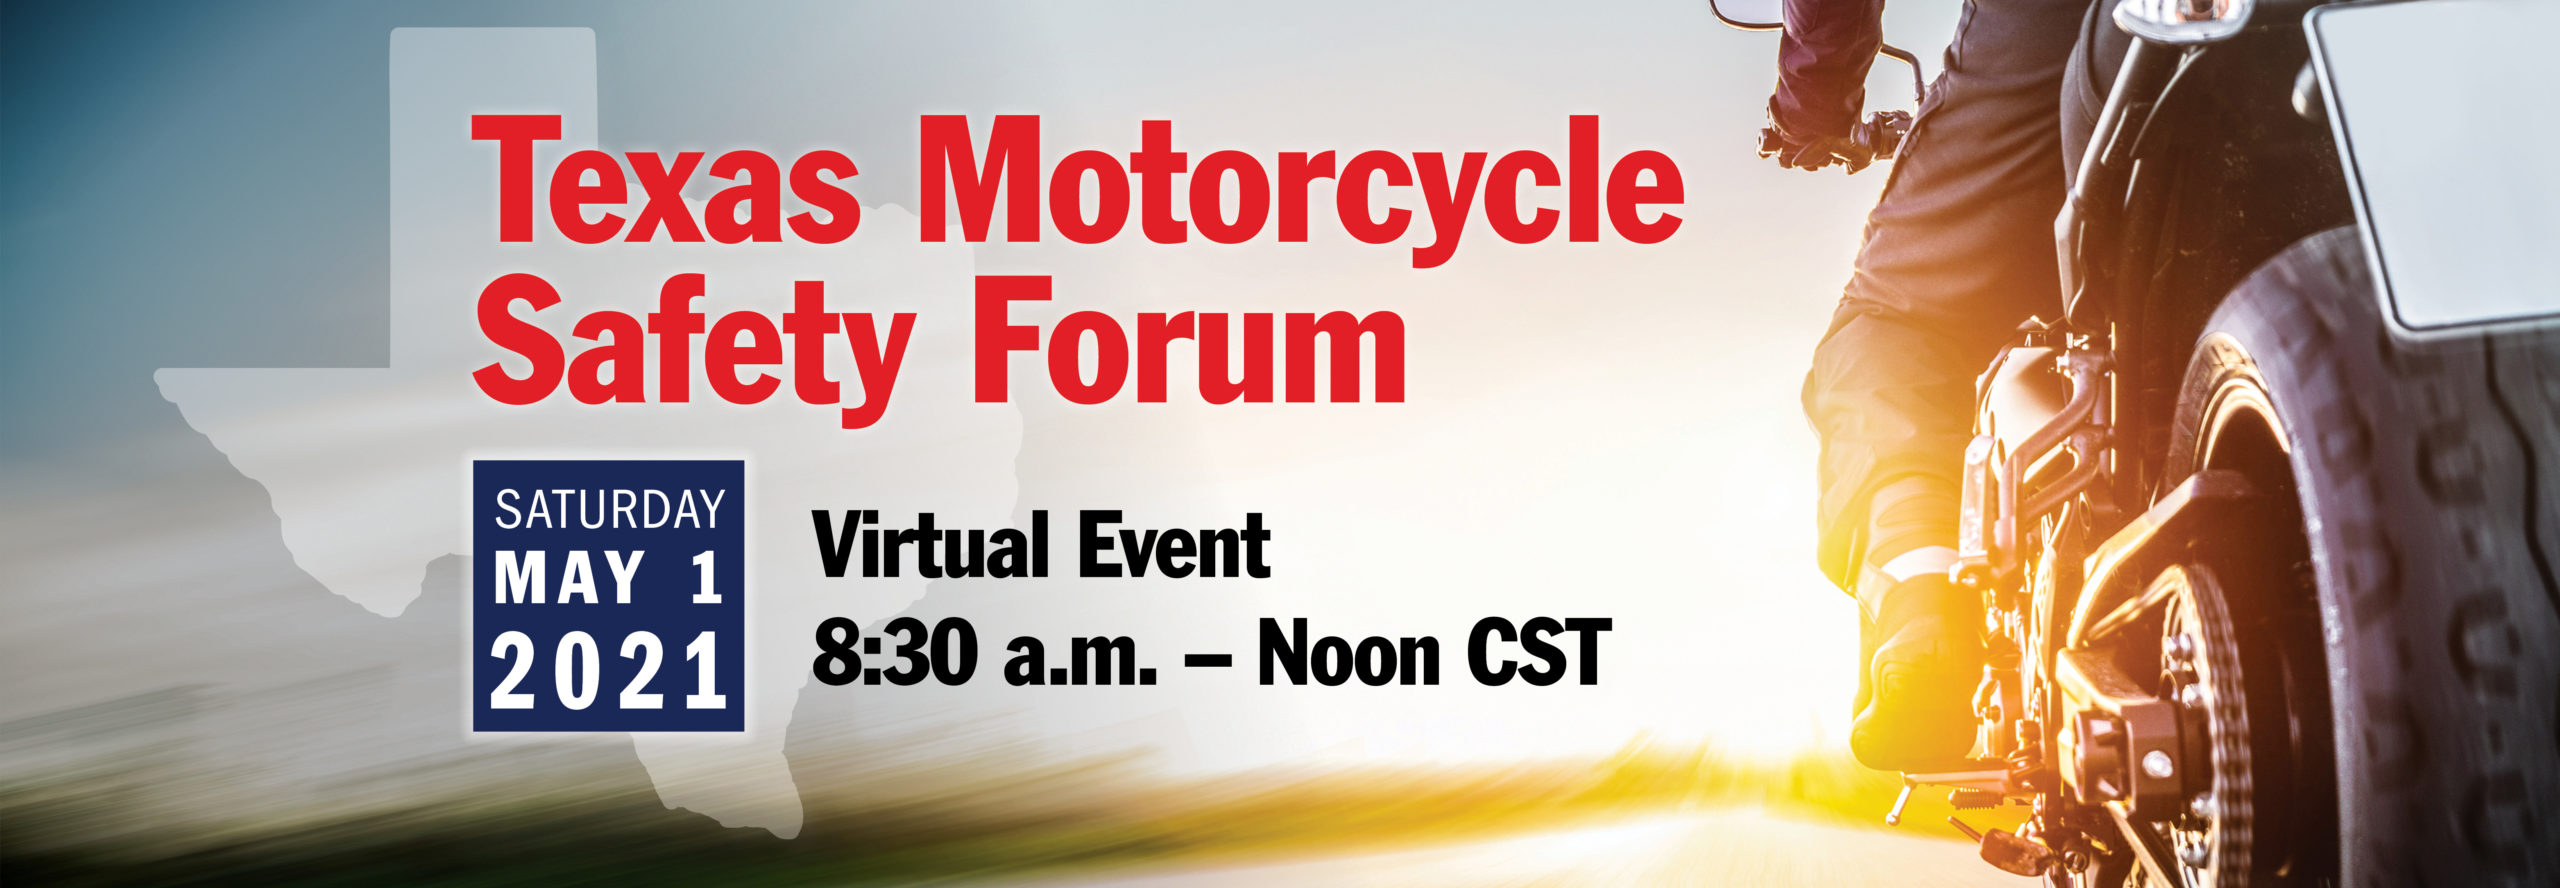 2021 Texas Motorcycle Safety Forum - Look Learn Live.org